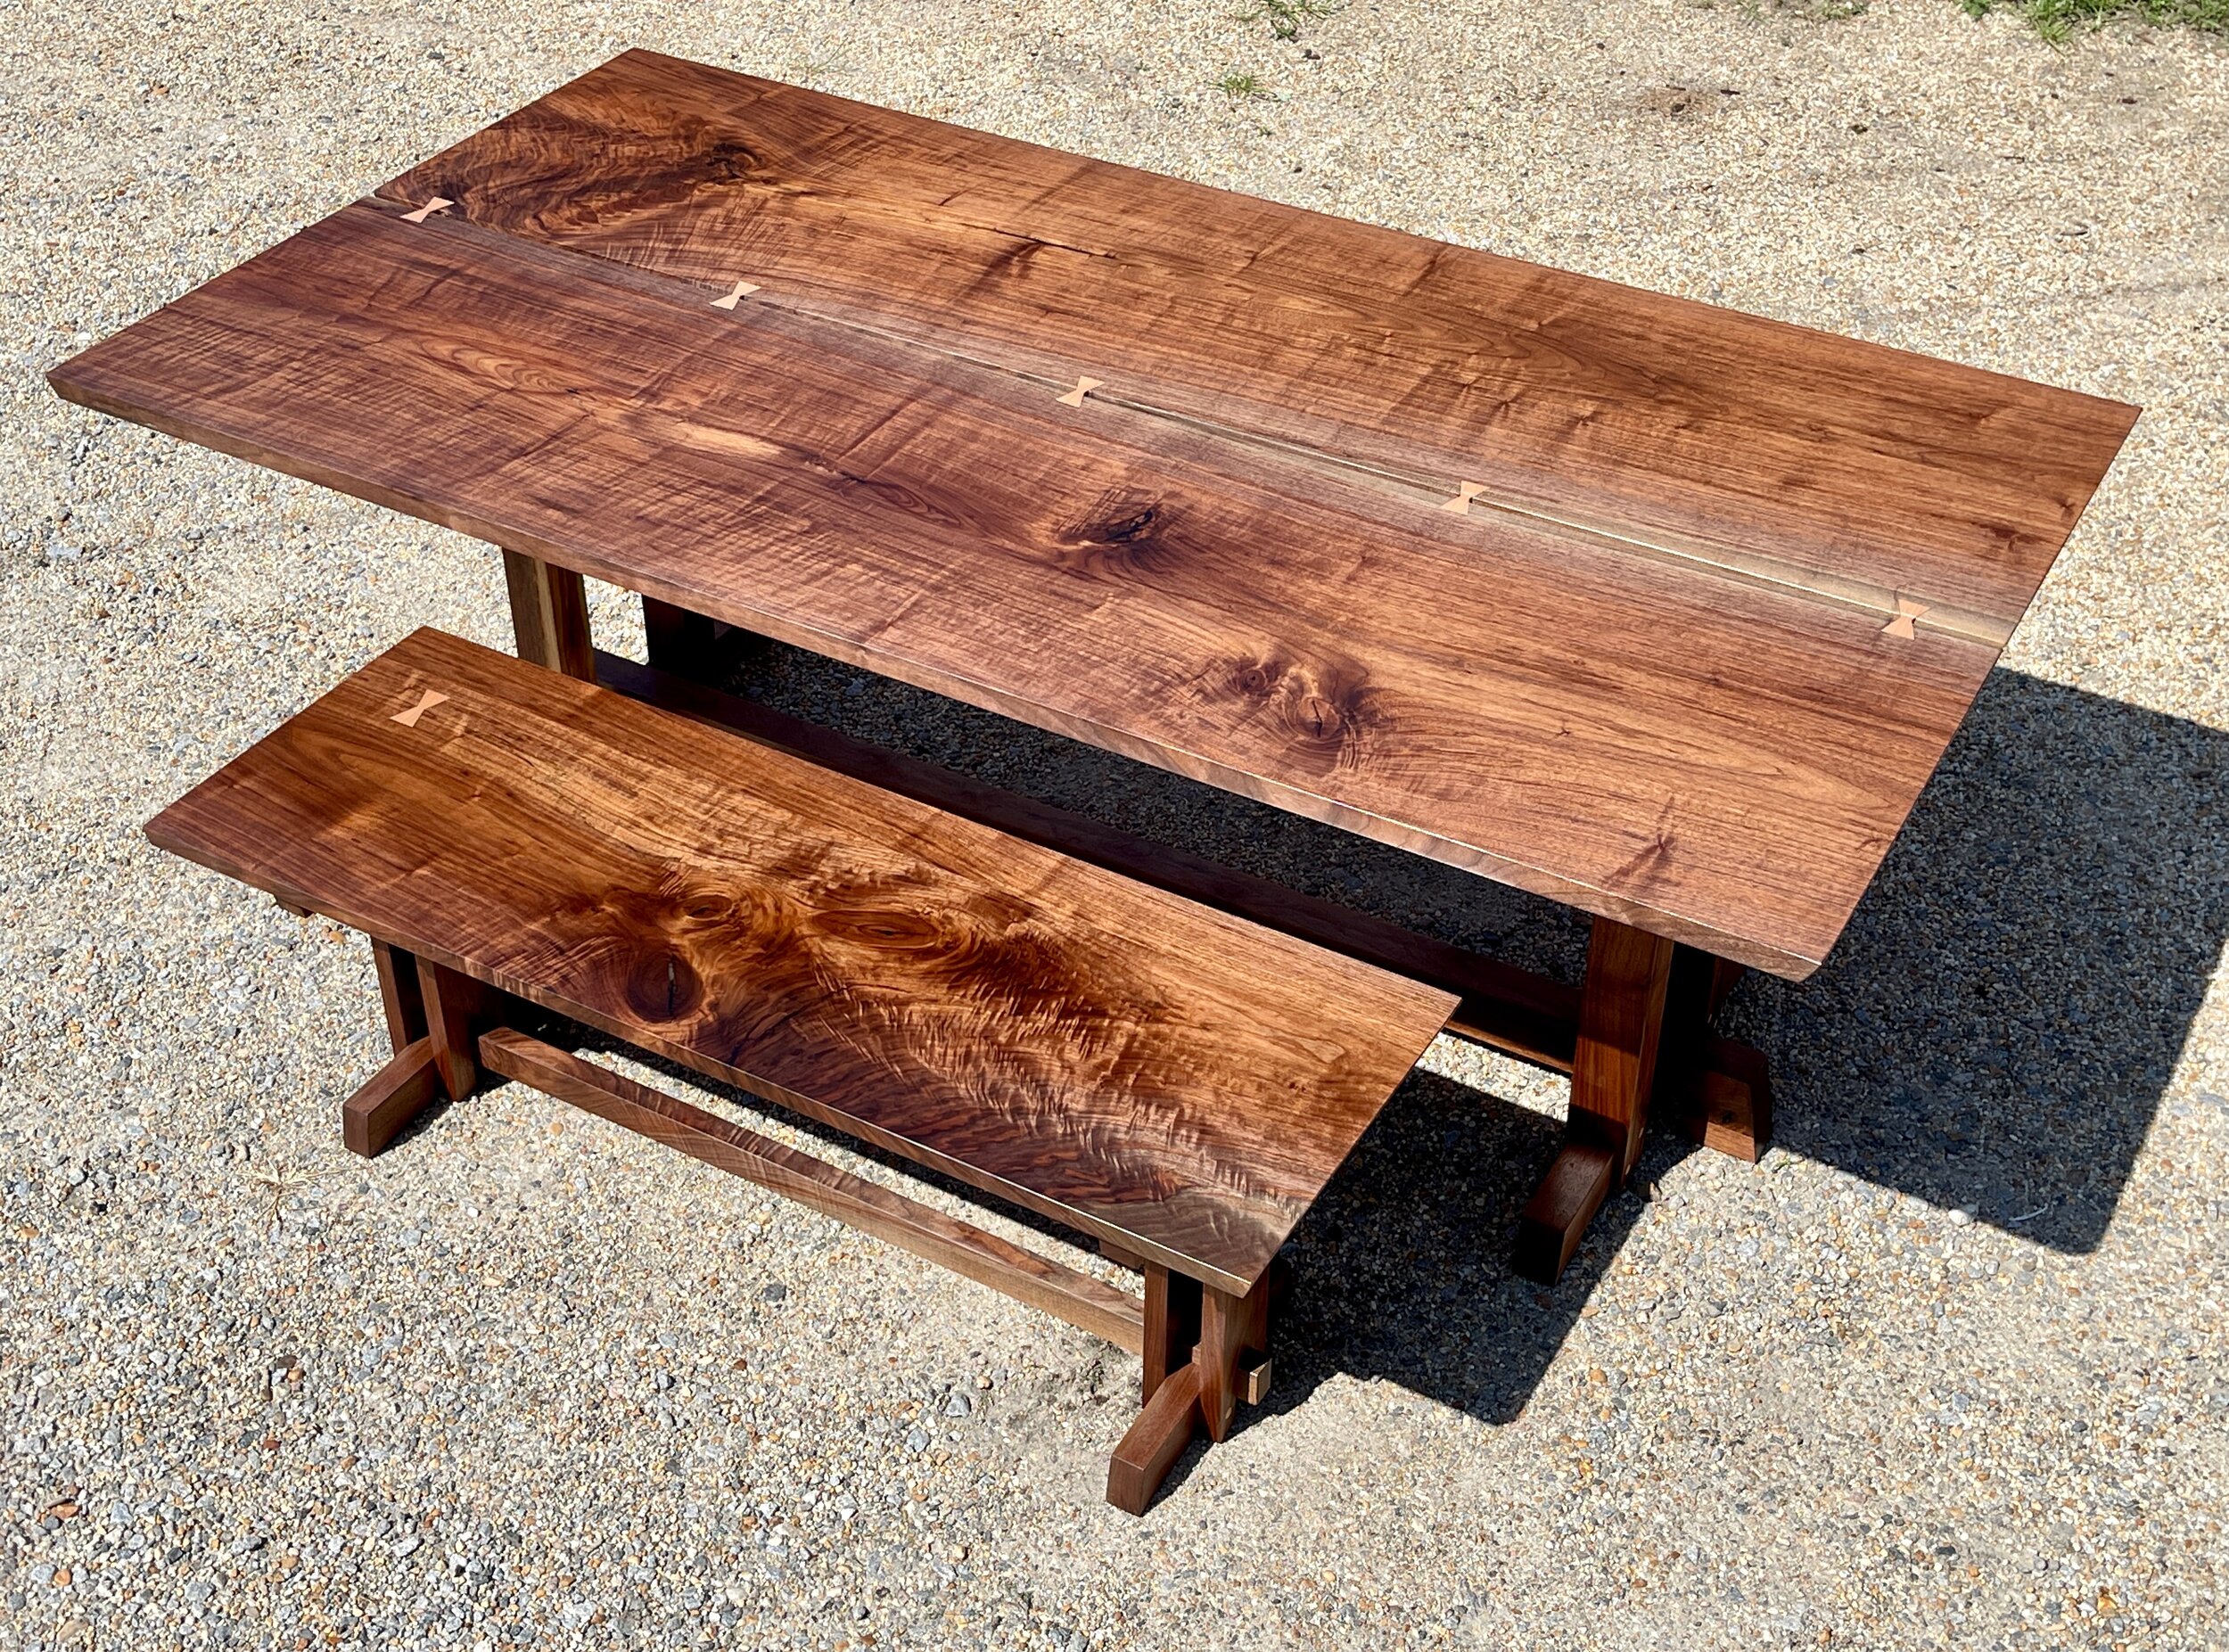 Walnut Bowtie Table and Bench